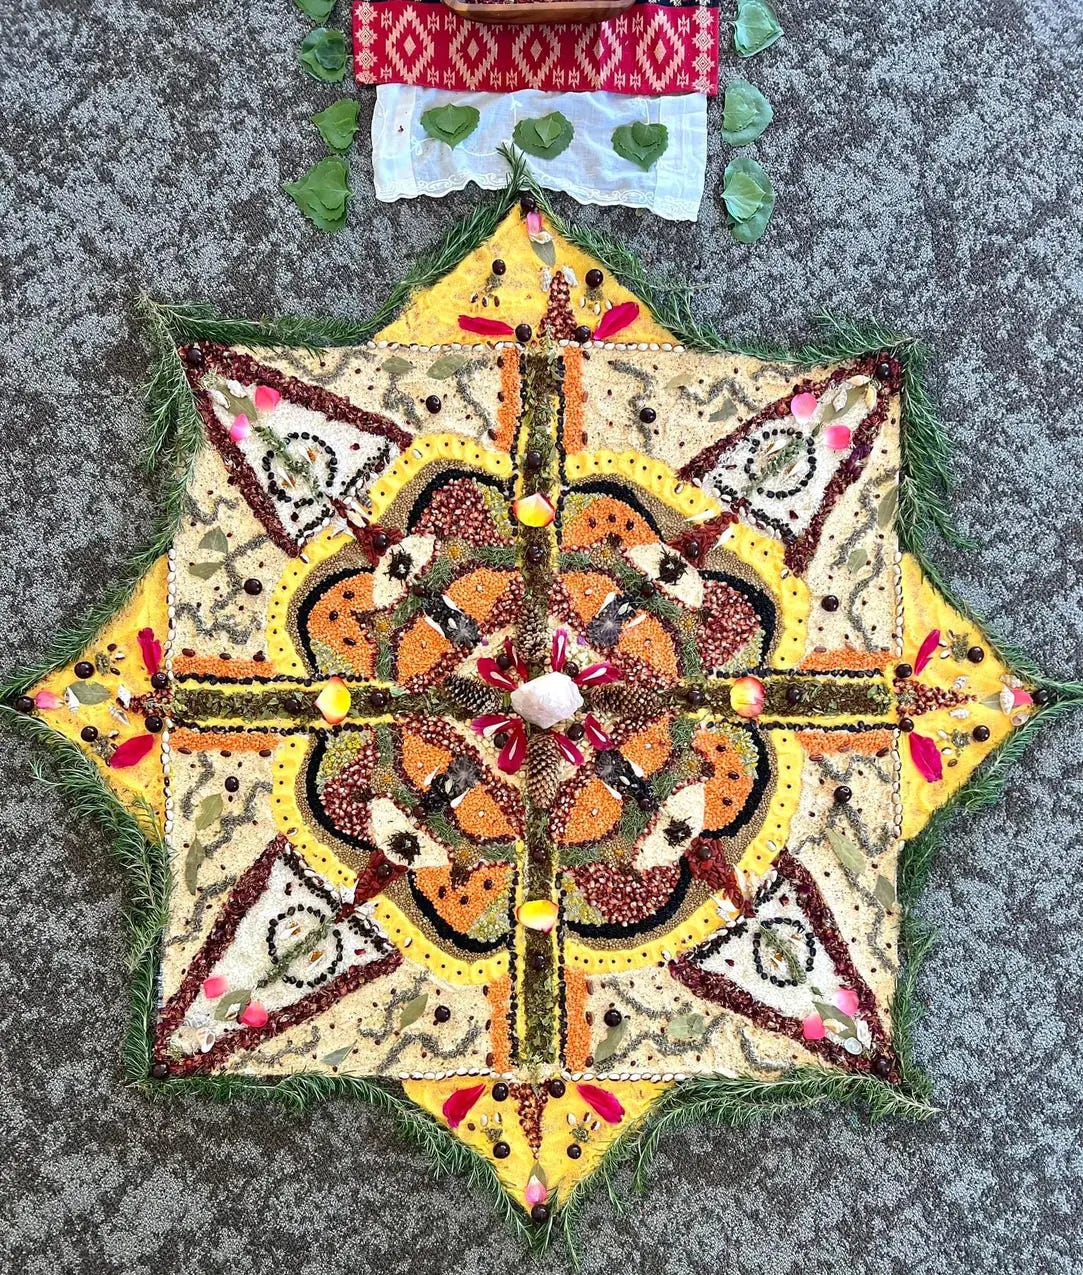 An approximately 3-foot wide, 8-pointed mandala sort of pattern on the floor. Each quadrant is symmetrical with a central flower pattern. Made from plant materials, it is multi-colored in earthy hues of yellow, white, red, orange, black and green. It is outlined in sprigs of rosemary.